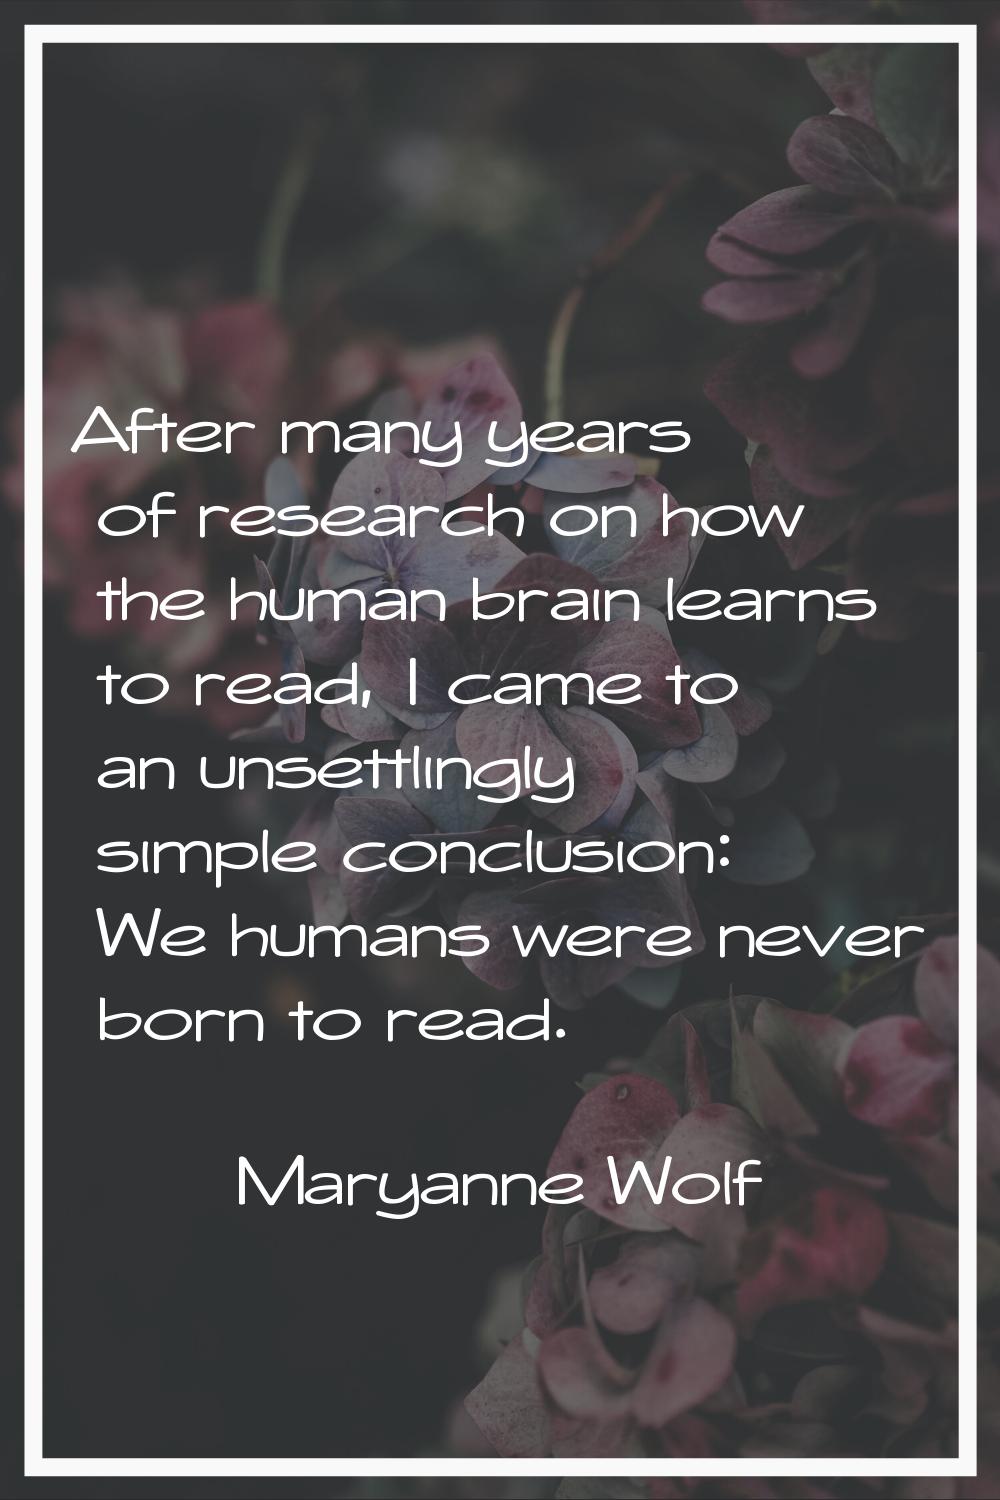 After many years of research on how the human brain learns to read, I came to an unsettlingly simpl